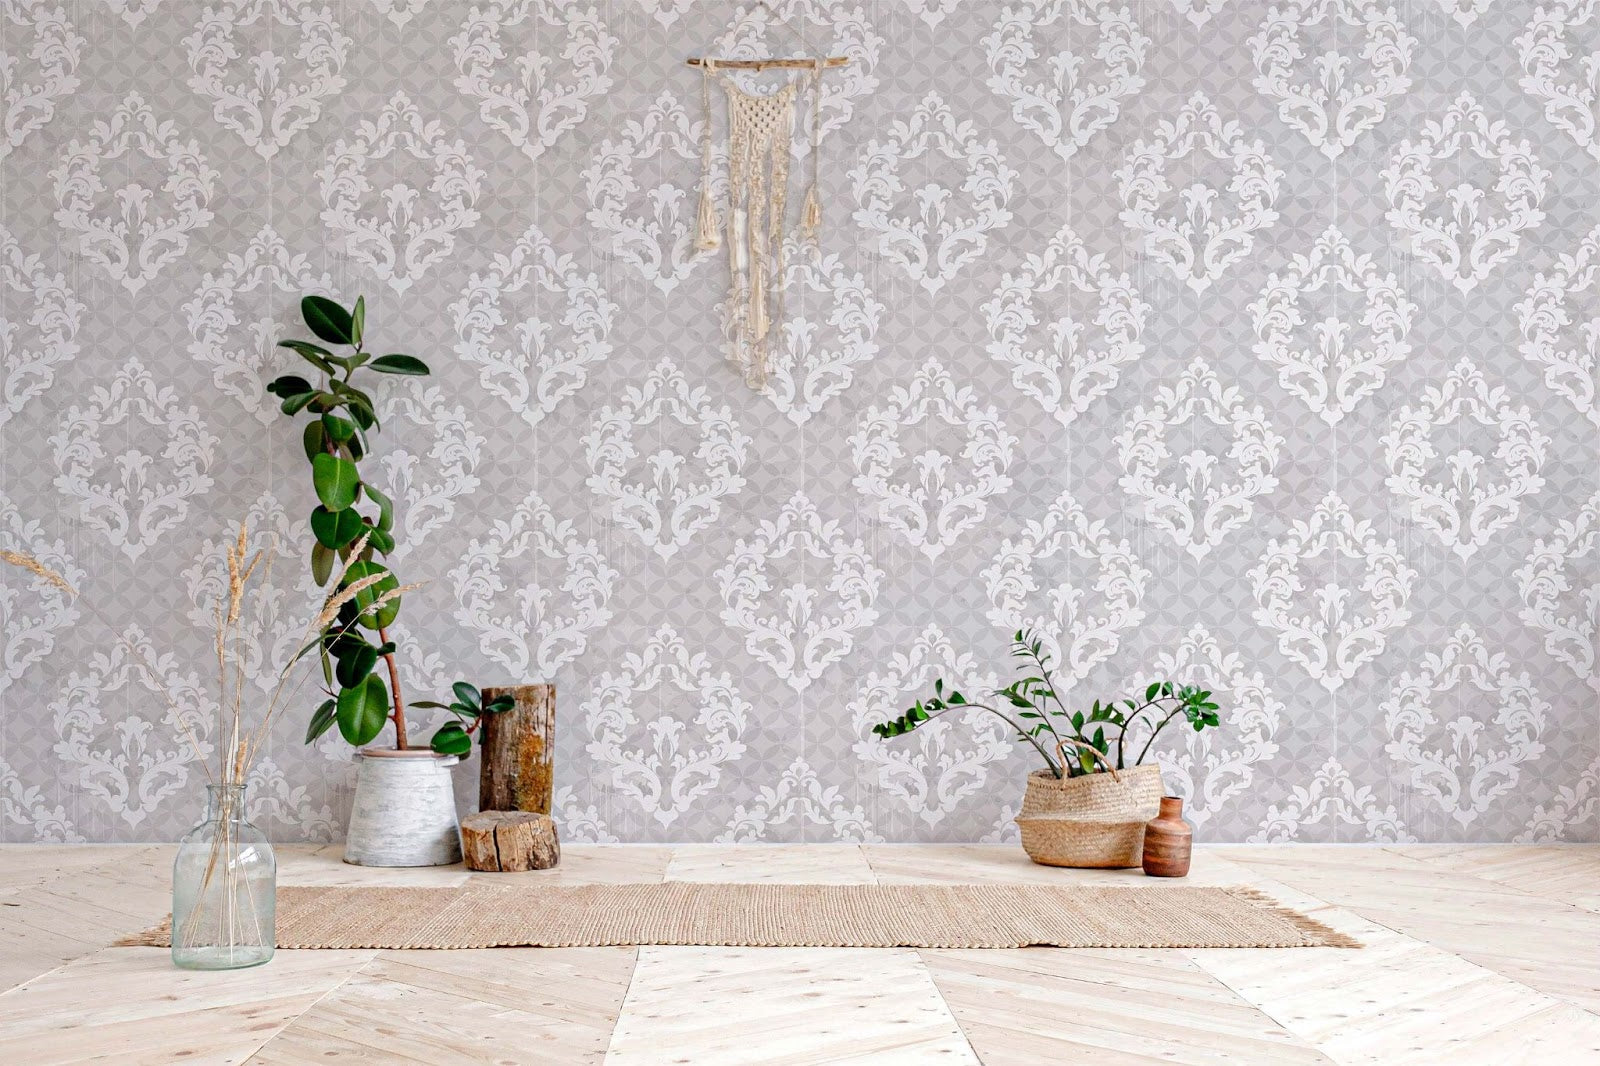 How To Prep Walls For Peel And Stick Wallpaper | Walls By Me